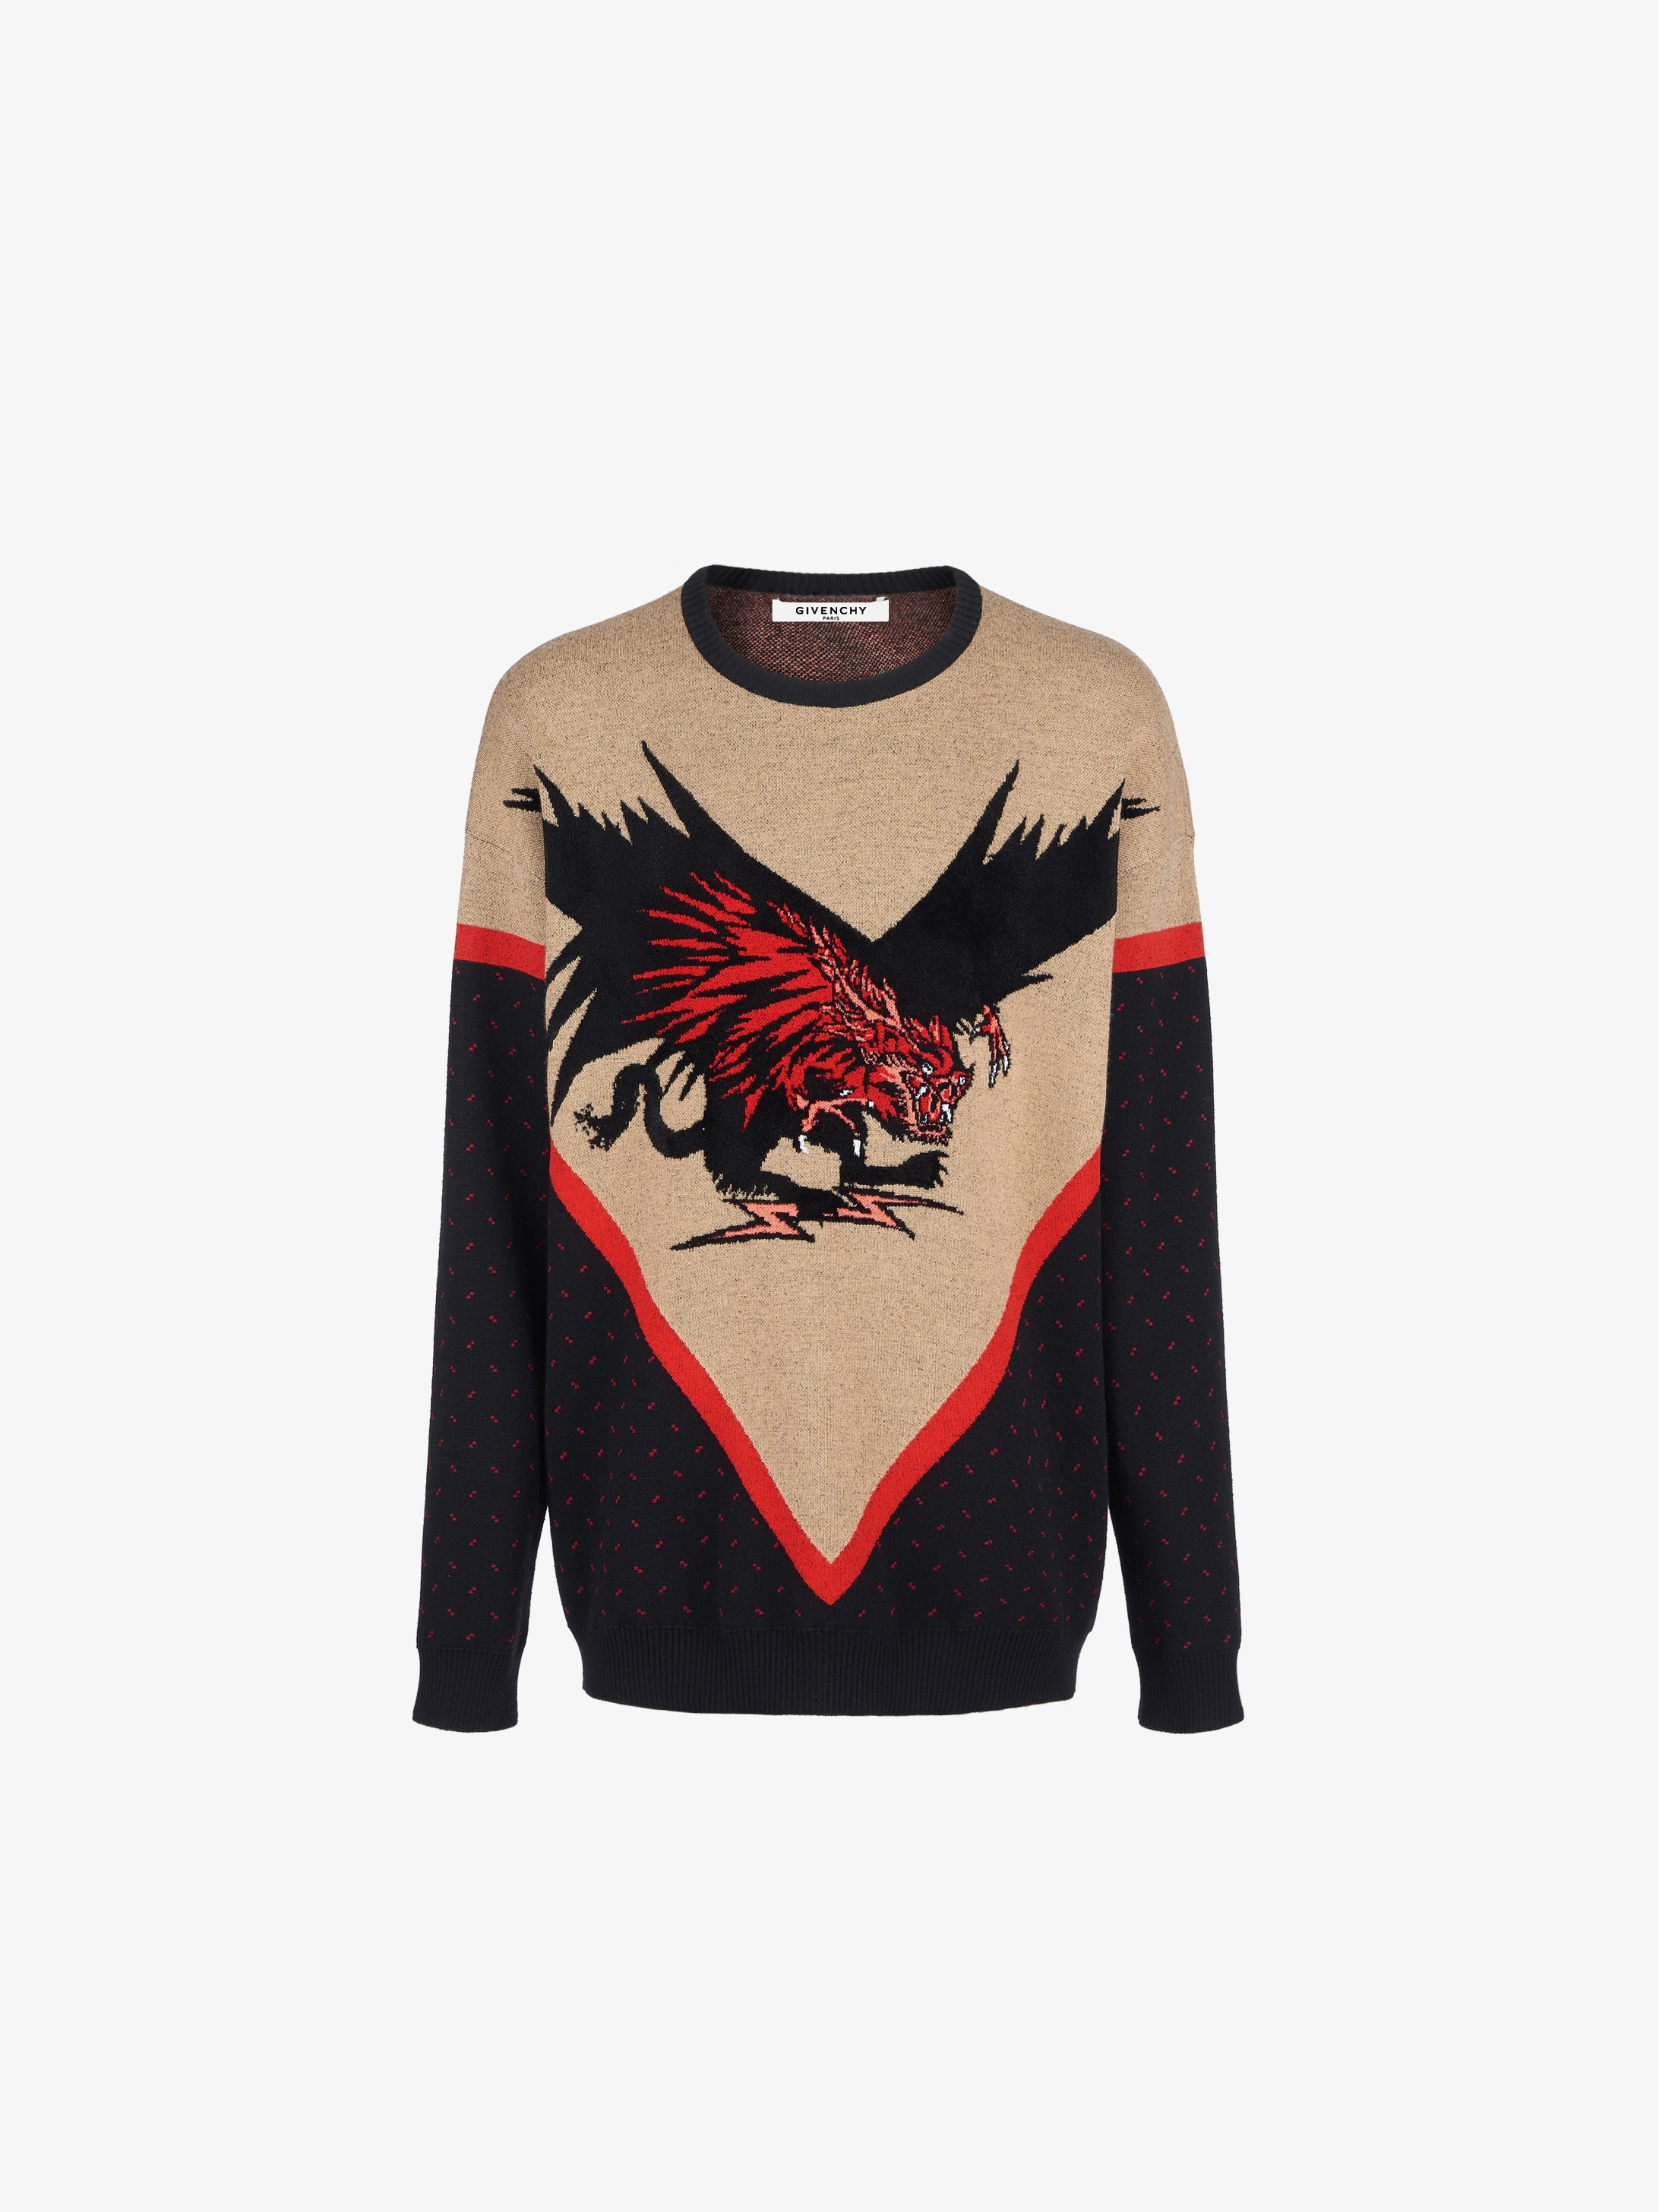 Monster oversized sweater | GIVENCHY Paris